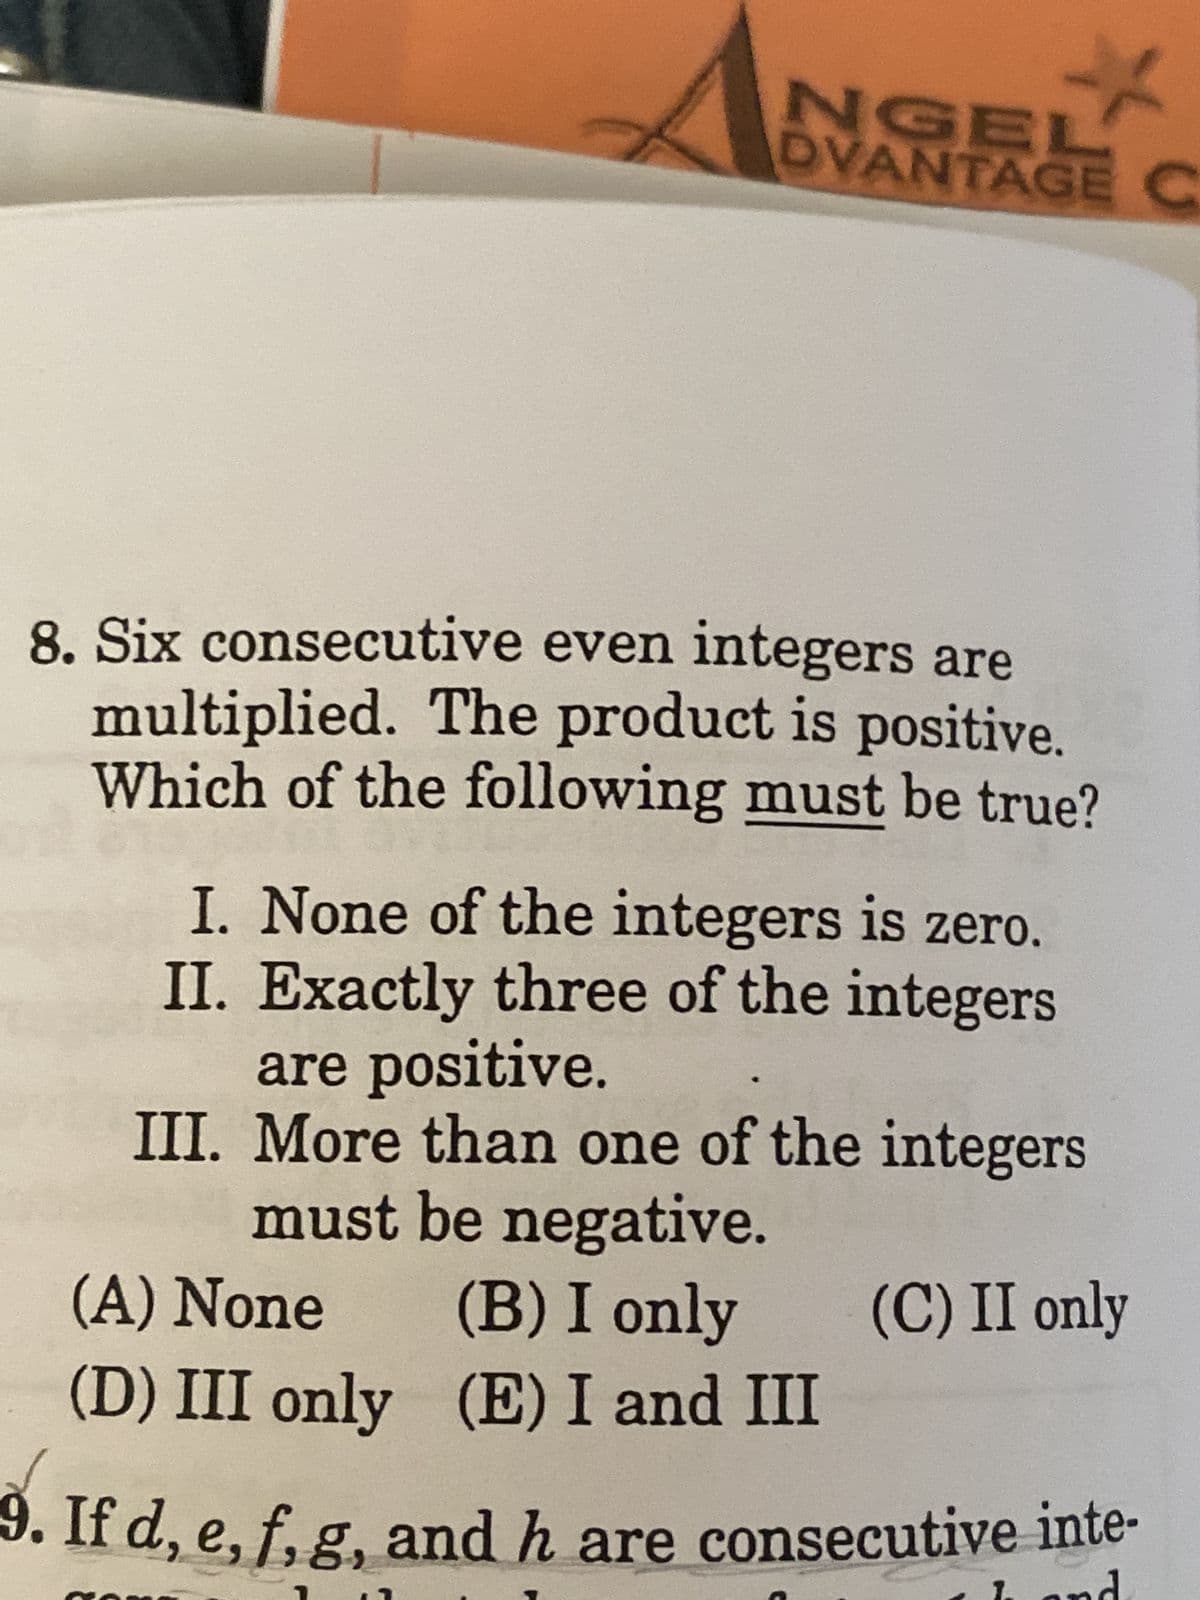 *
NGEL
DVANTAGE C
8. Six consecutive even integers are
multiplied. The product is positive.
Which of the following must be true?
I. None of the integers is zero.
II. Exactly three of the integers
are positive.
III. More than one of the integers
must be negative.
(C) II only
(A) None
(B) I only
(D) III only
(E) I and III
9. If d, e, f, g, and h are consecutive inte-